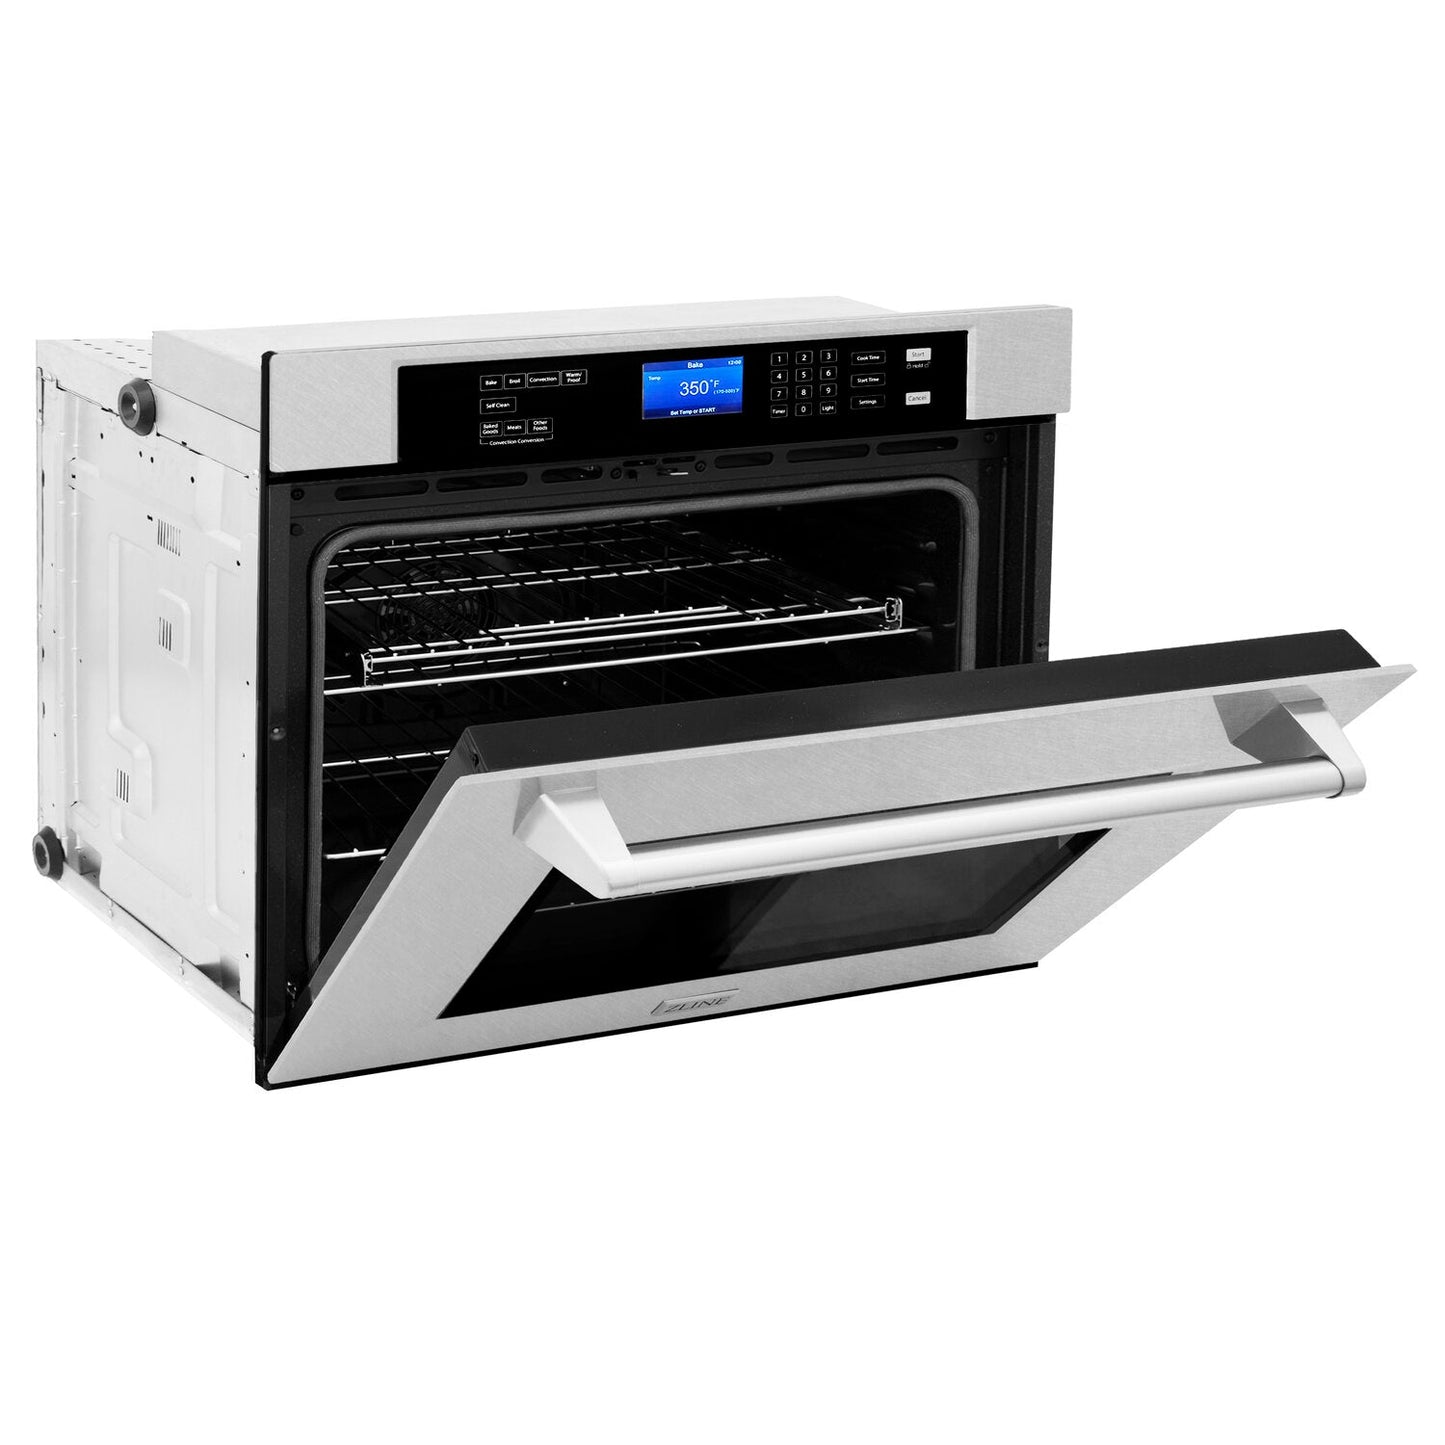 ZLINE Professional 30" DuraSnow Stainless Steel Electric Convection Single Wall Oven With Self Clean Technology